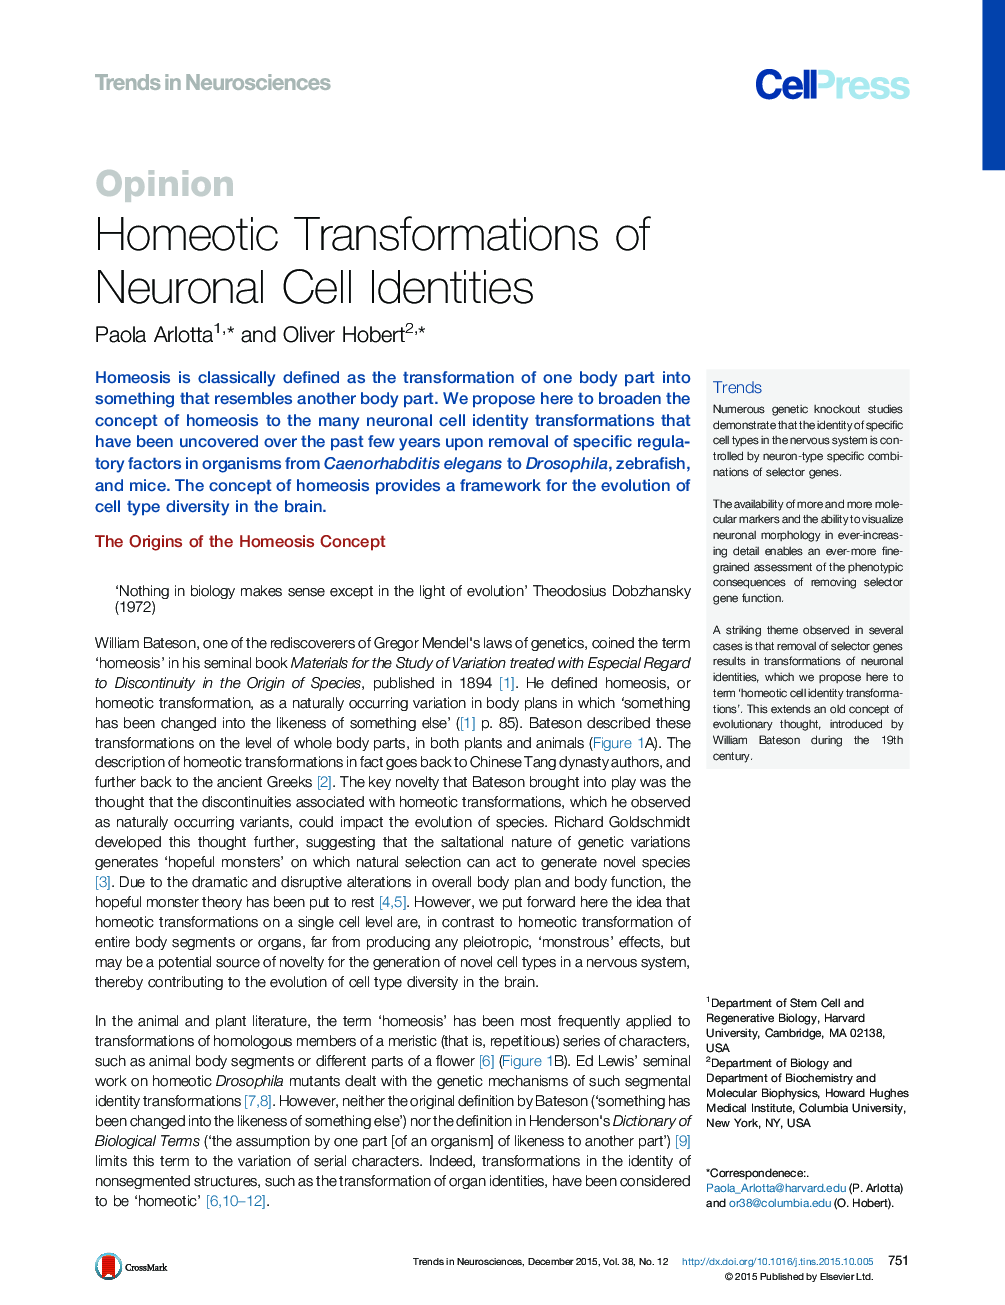 Homeotic Transformations of Neuronal Cell Identities